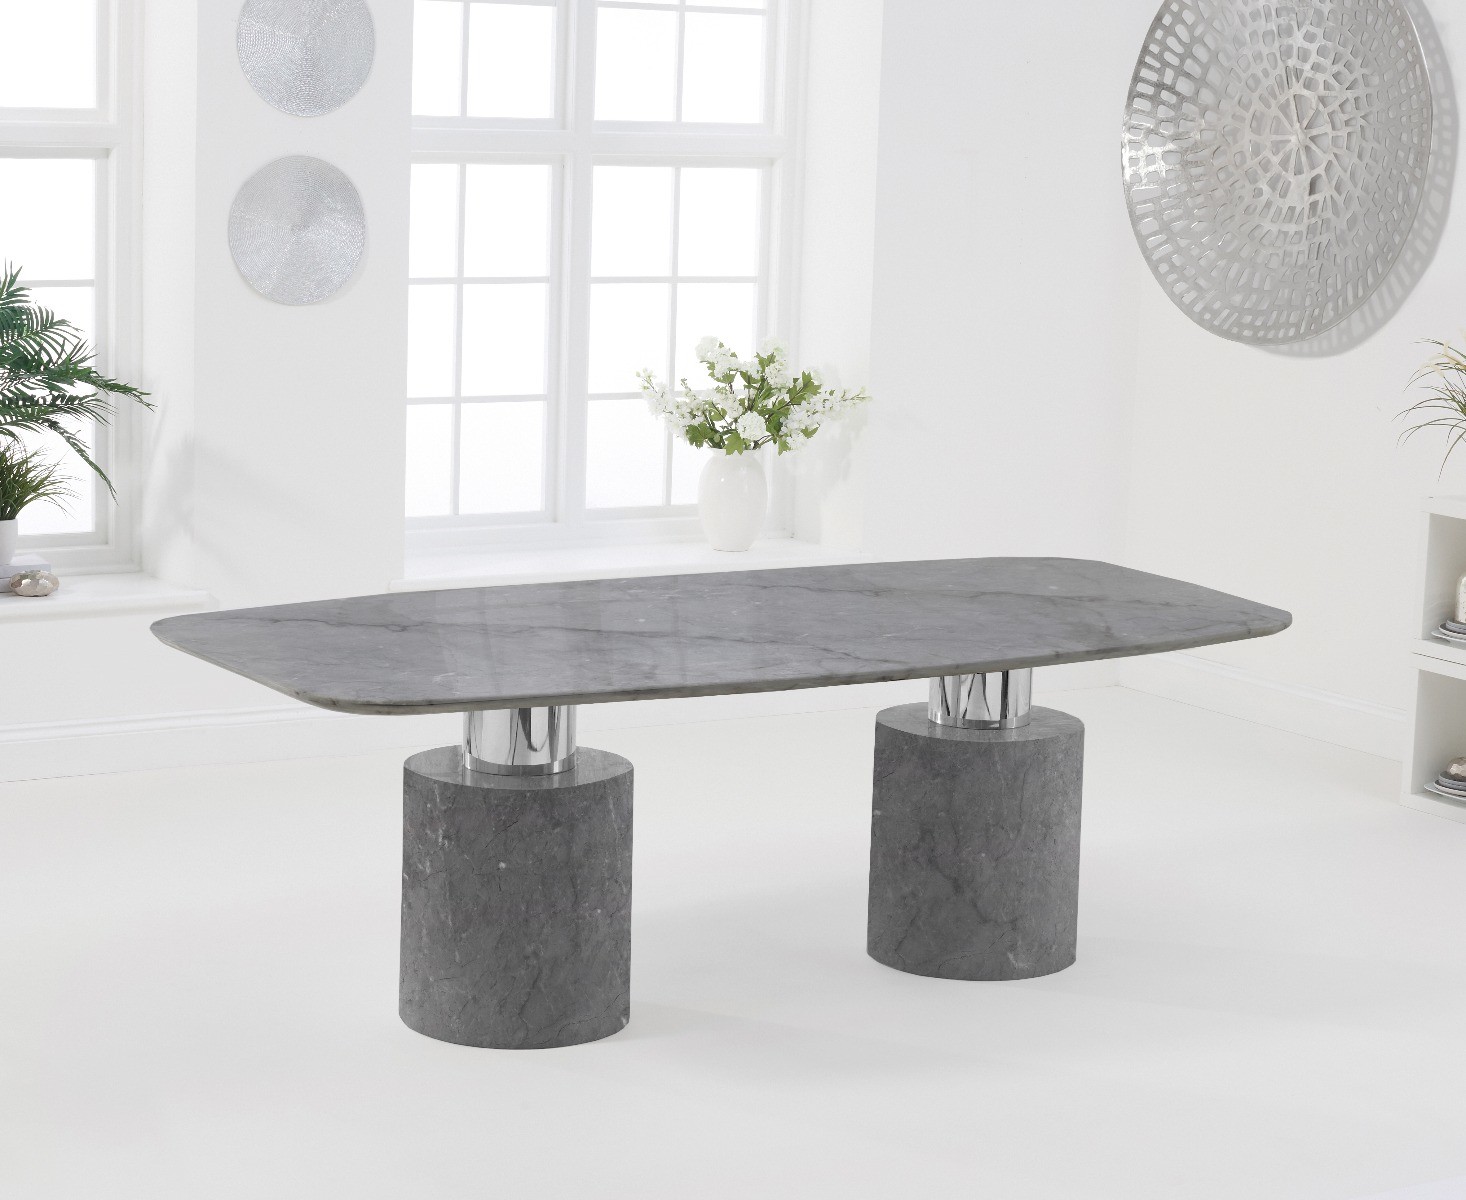 Photo 4 of Antonio 220cm grey marble dining table with 6 grey sophia chairs